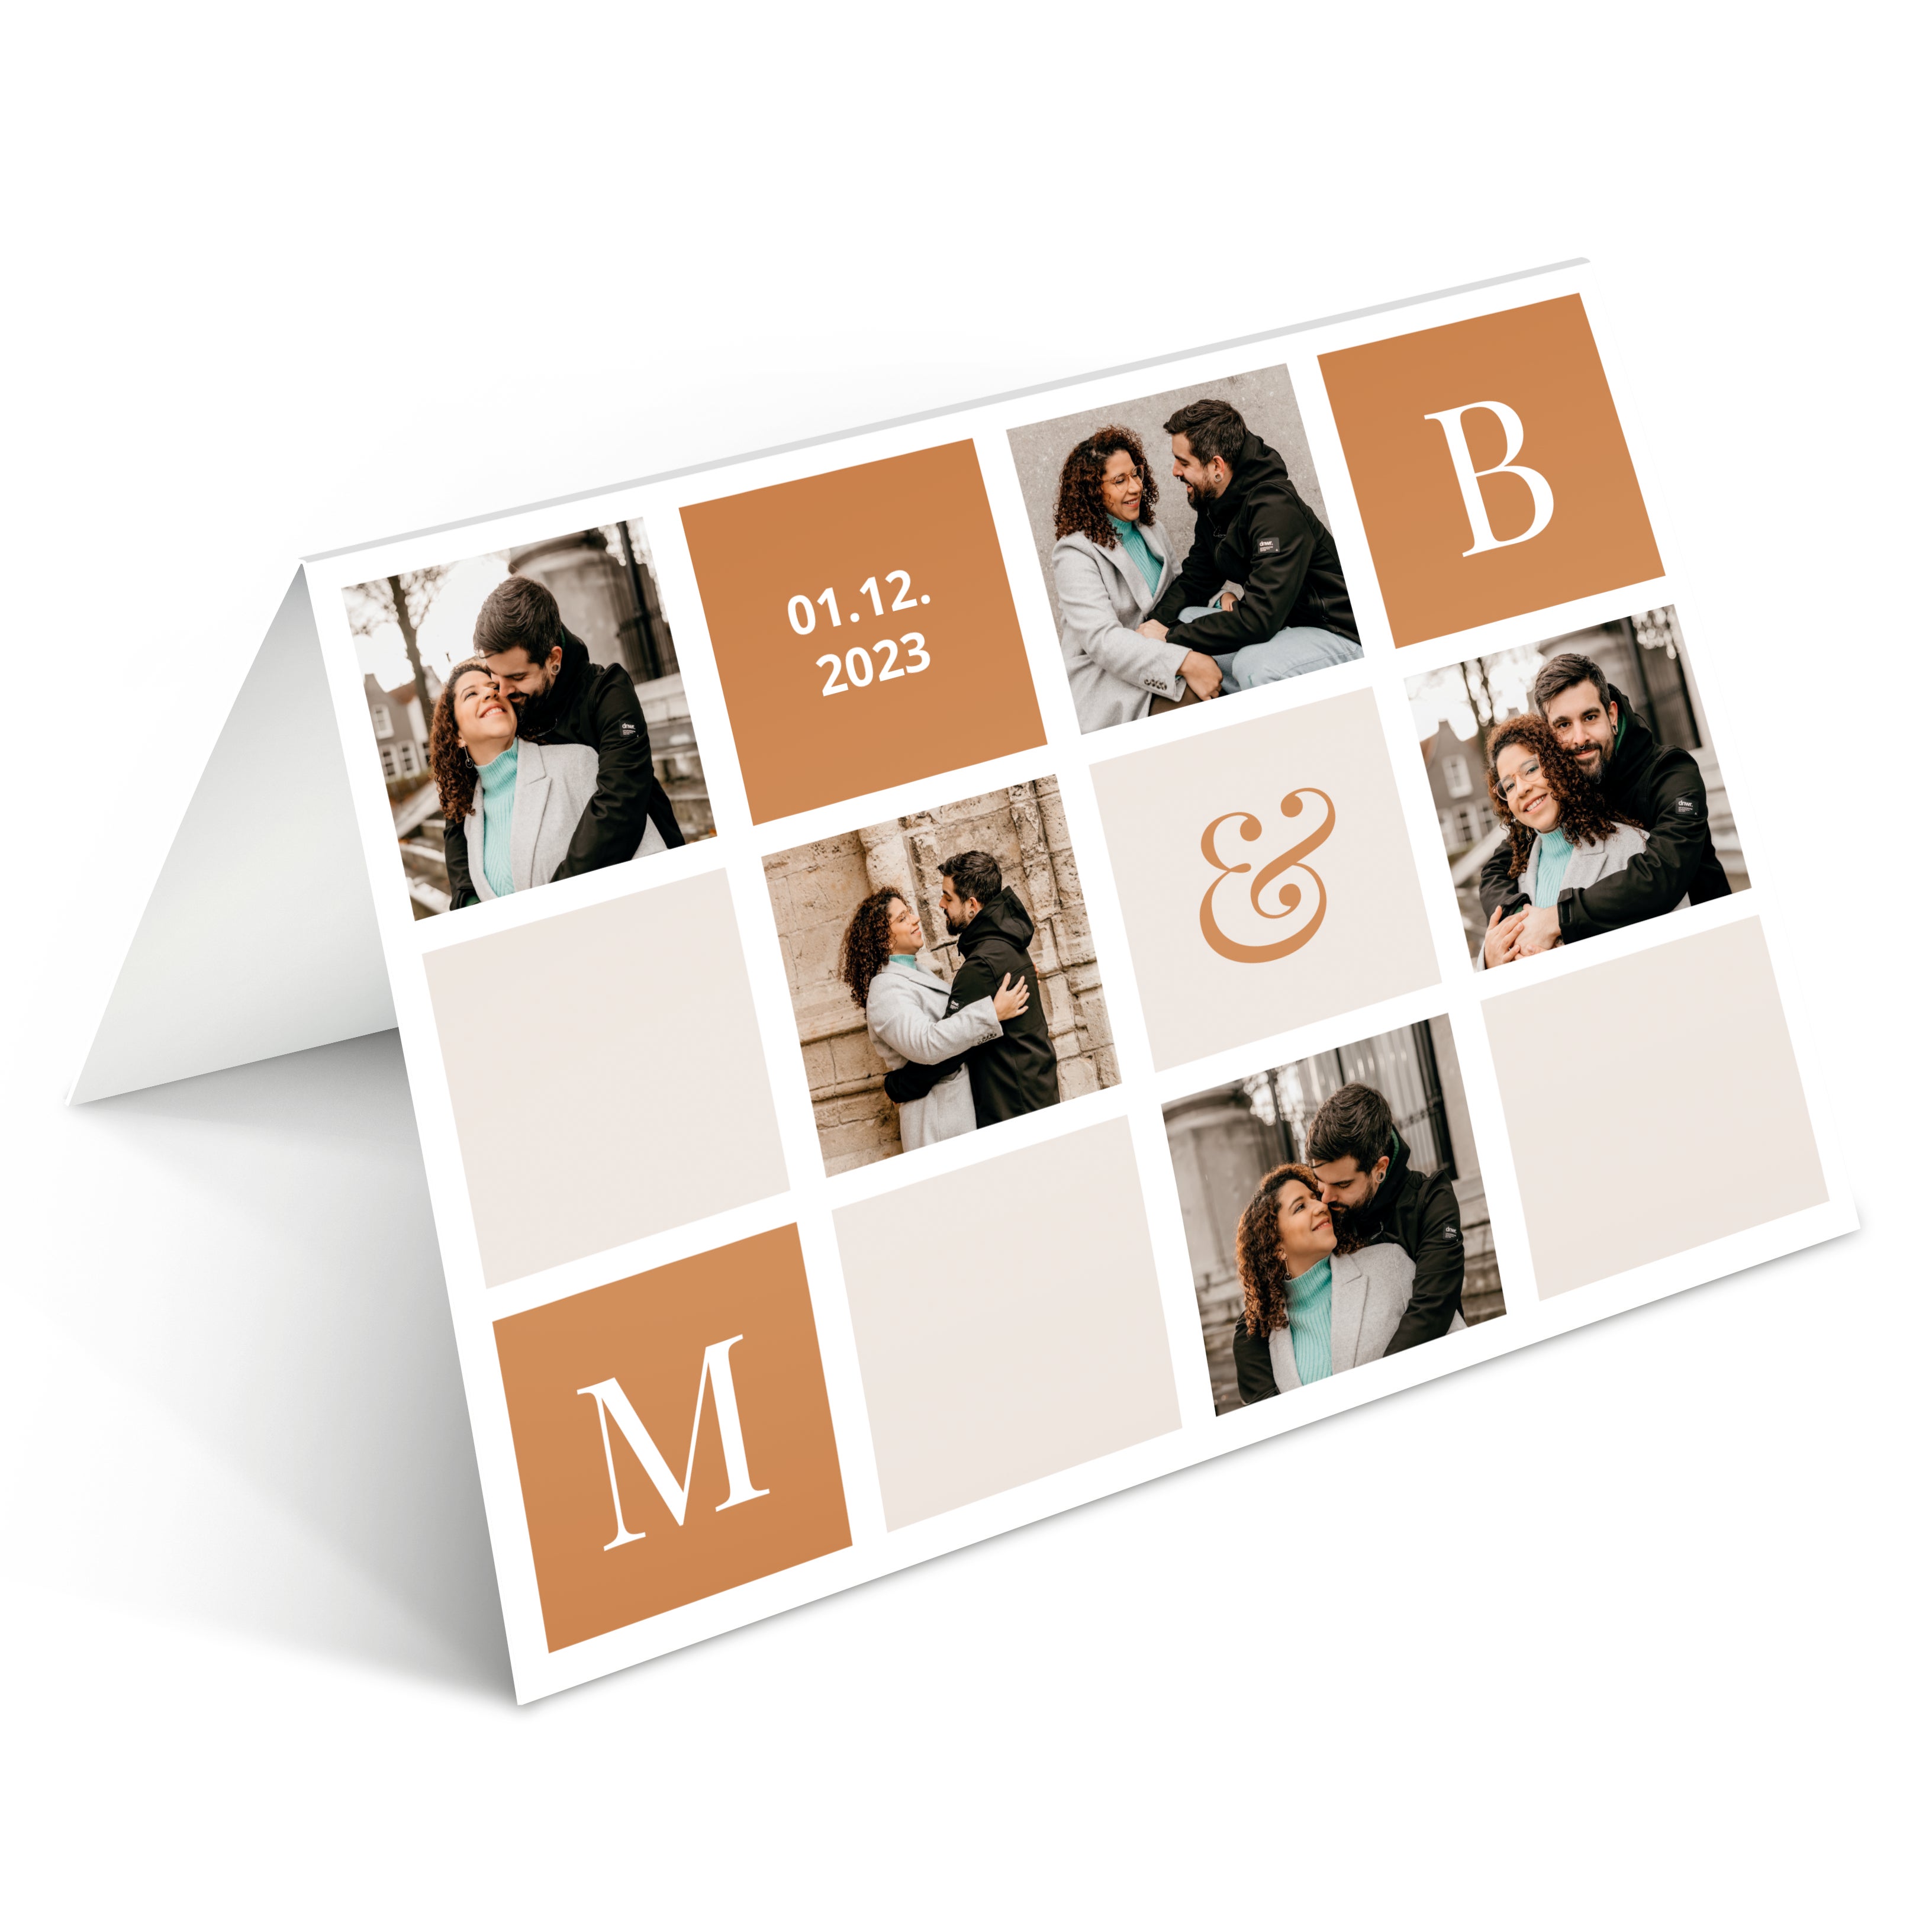 Personalised greeting card - M - Landscape